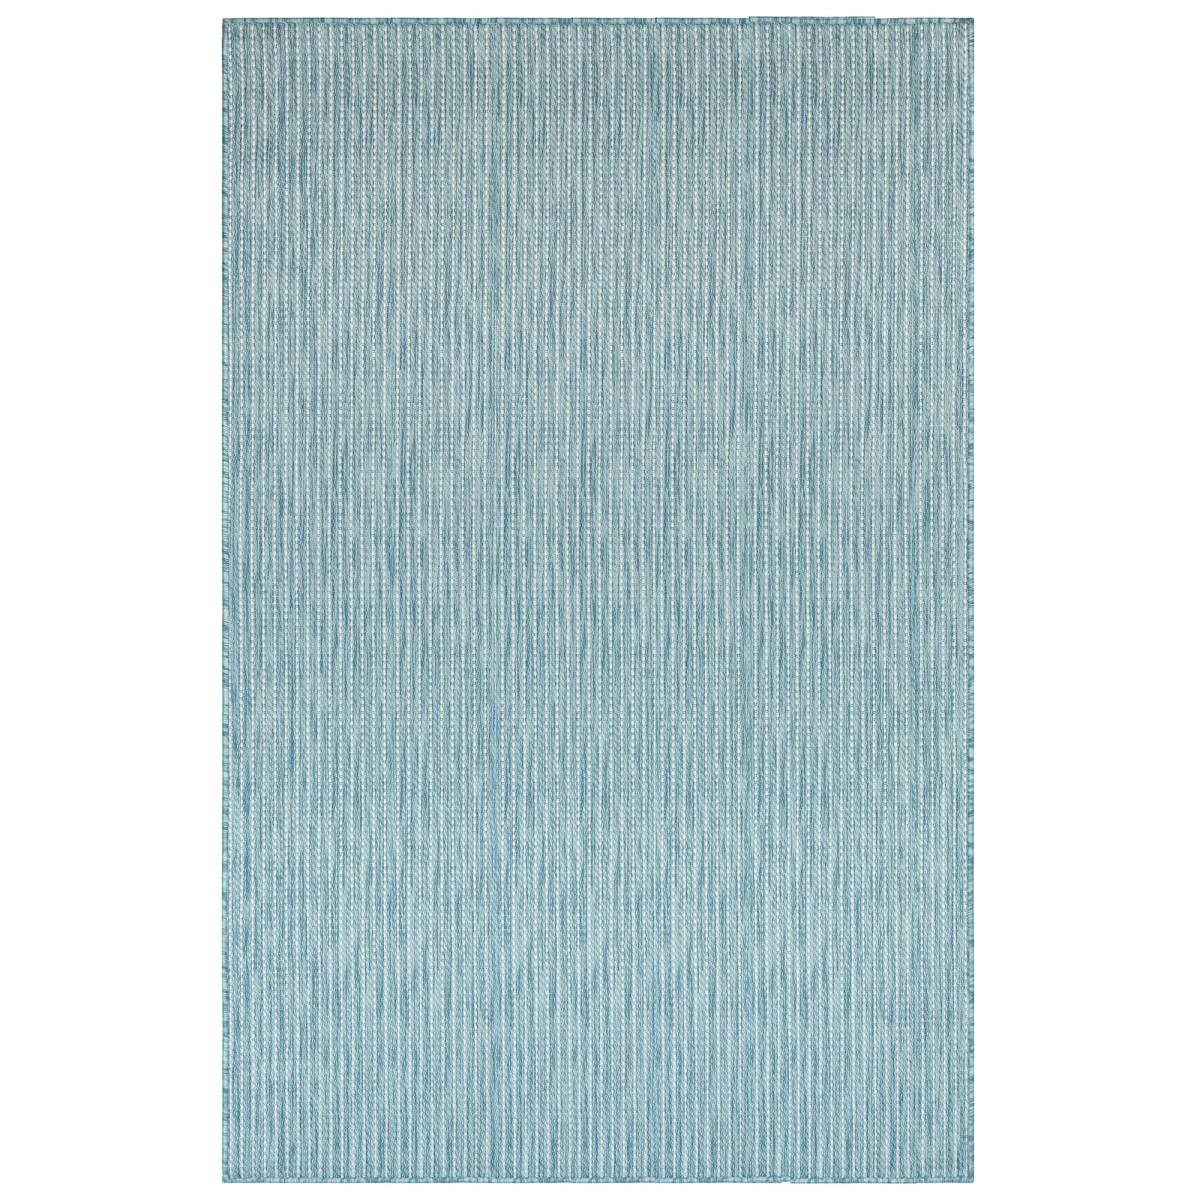 Trans-ocean Imports Cre80842204 7 Ft. 10 In. X 9 Ft. 10 In. Liora Manne Carmel Texture Stripe Indoor & Outdoor Wilton Woven Rectangle Rug - Aqua